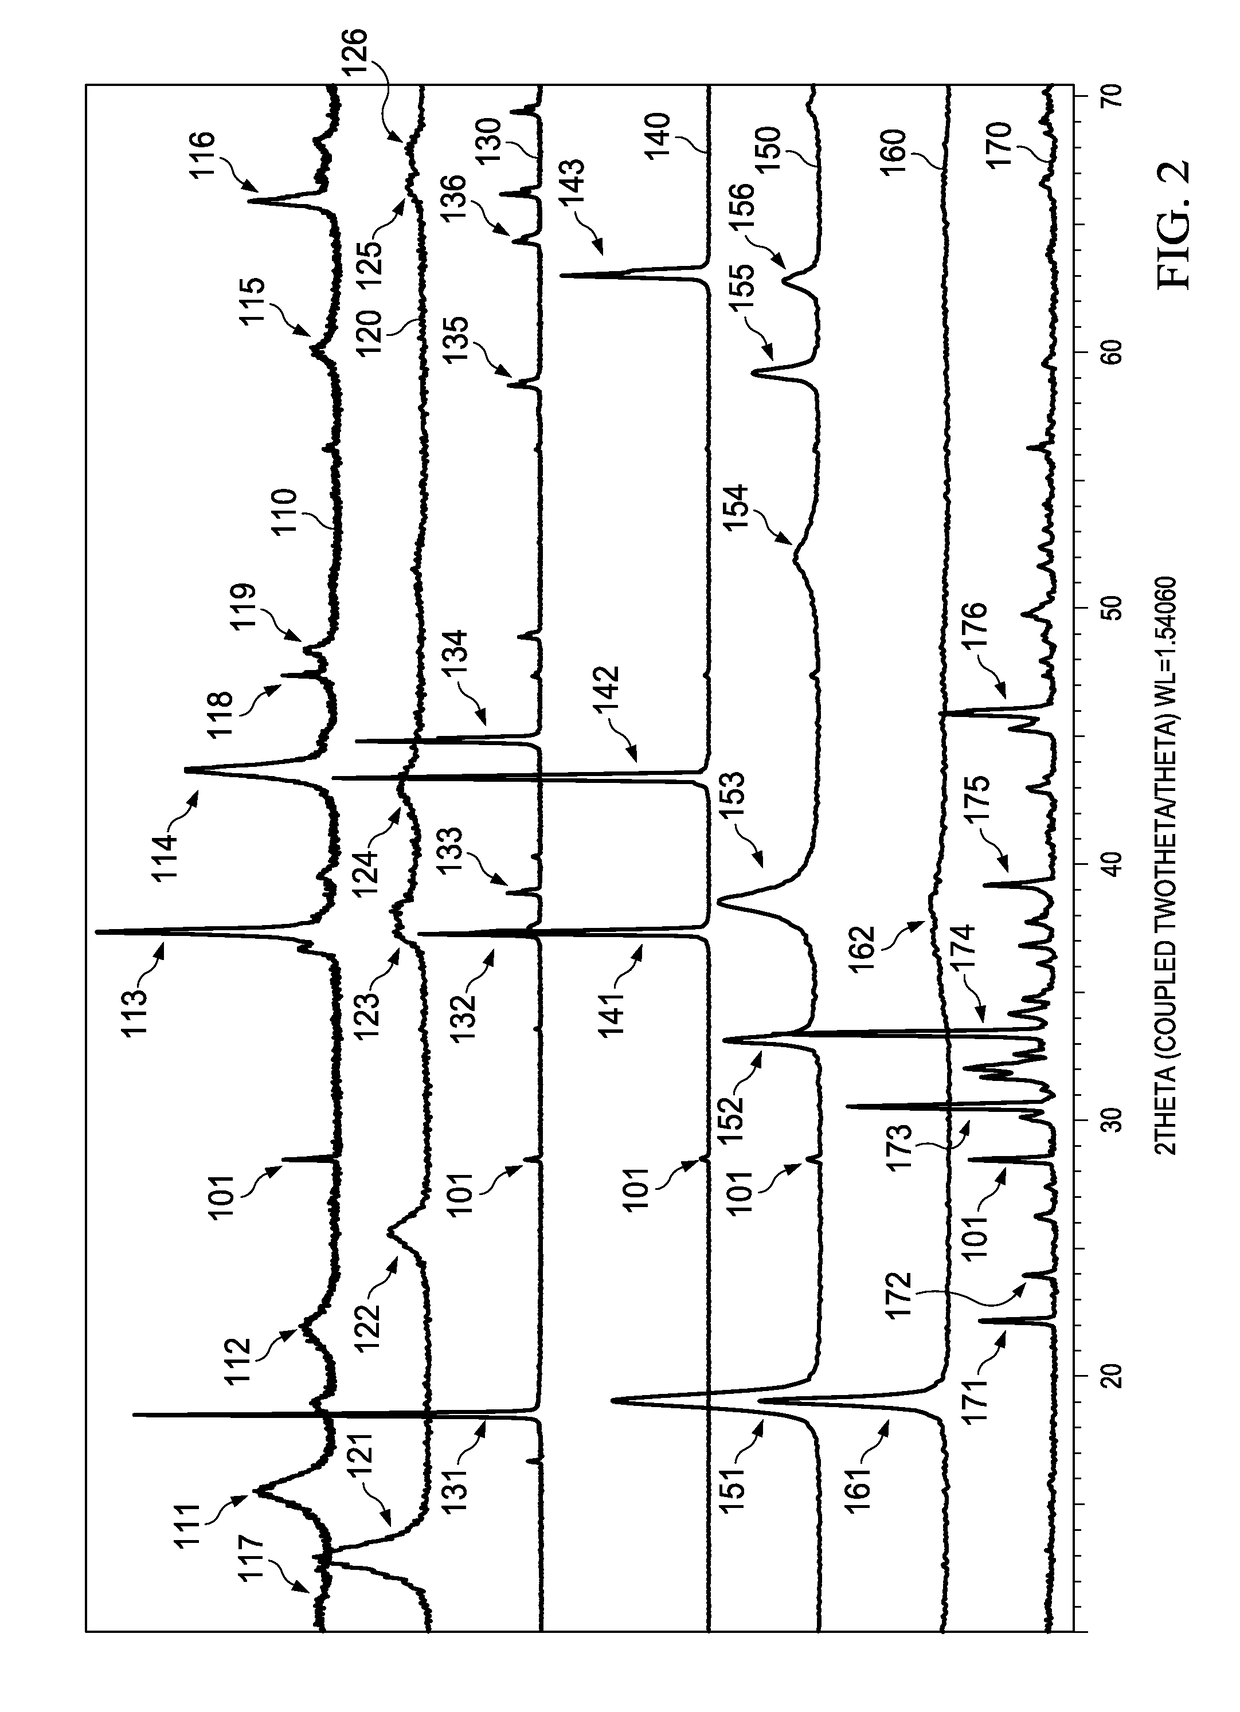 Beta-delithiated layered nickel oxide electrochemically active cathode material and a battery including said material